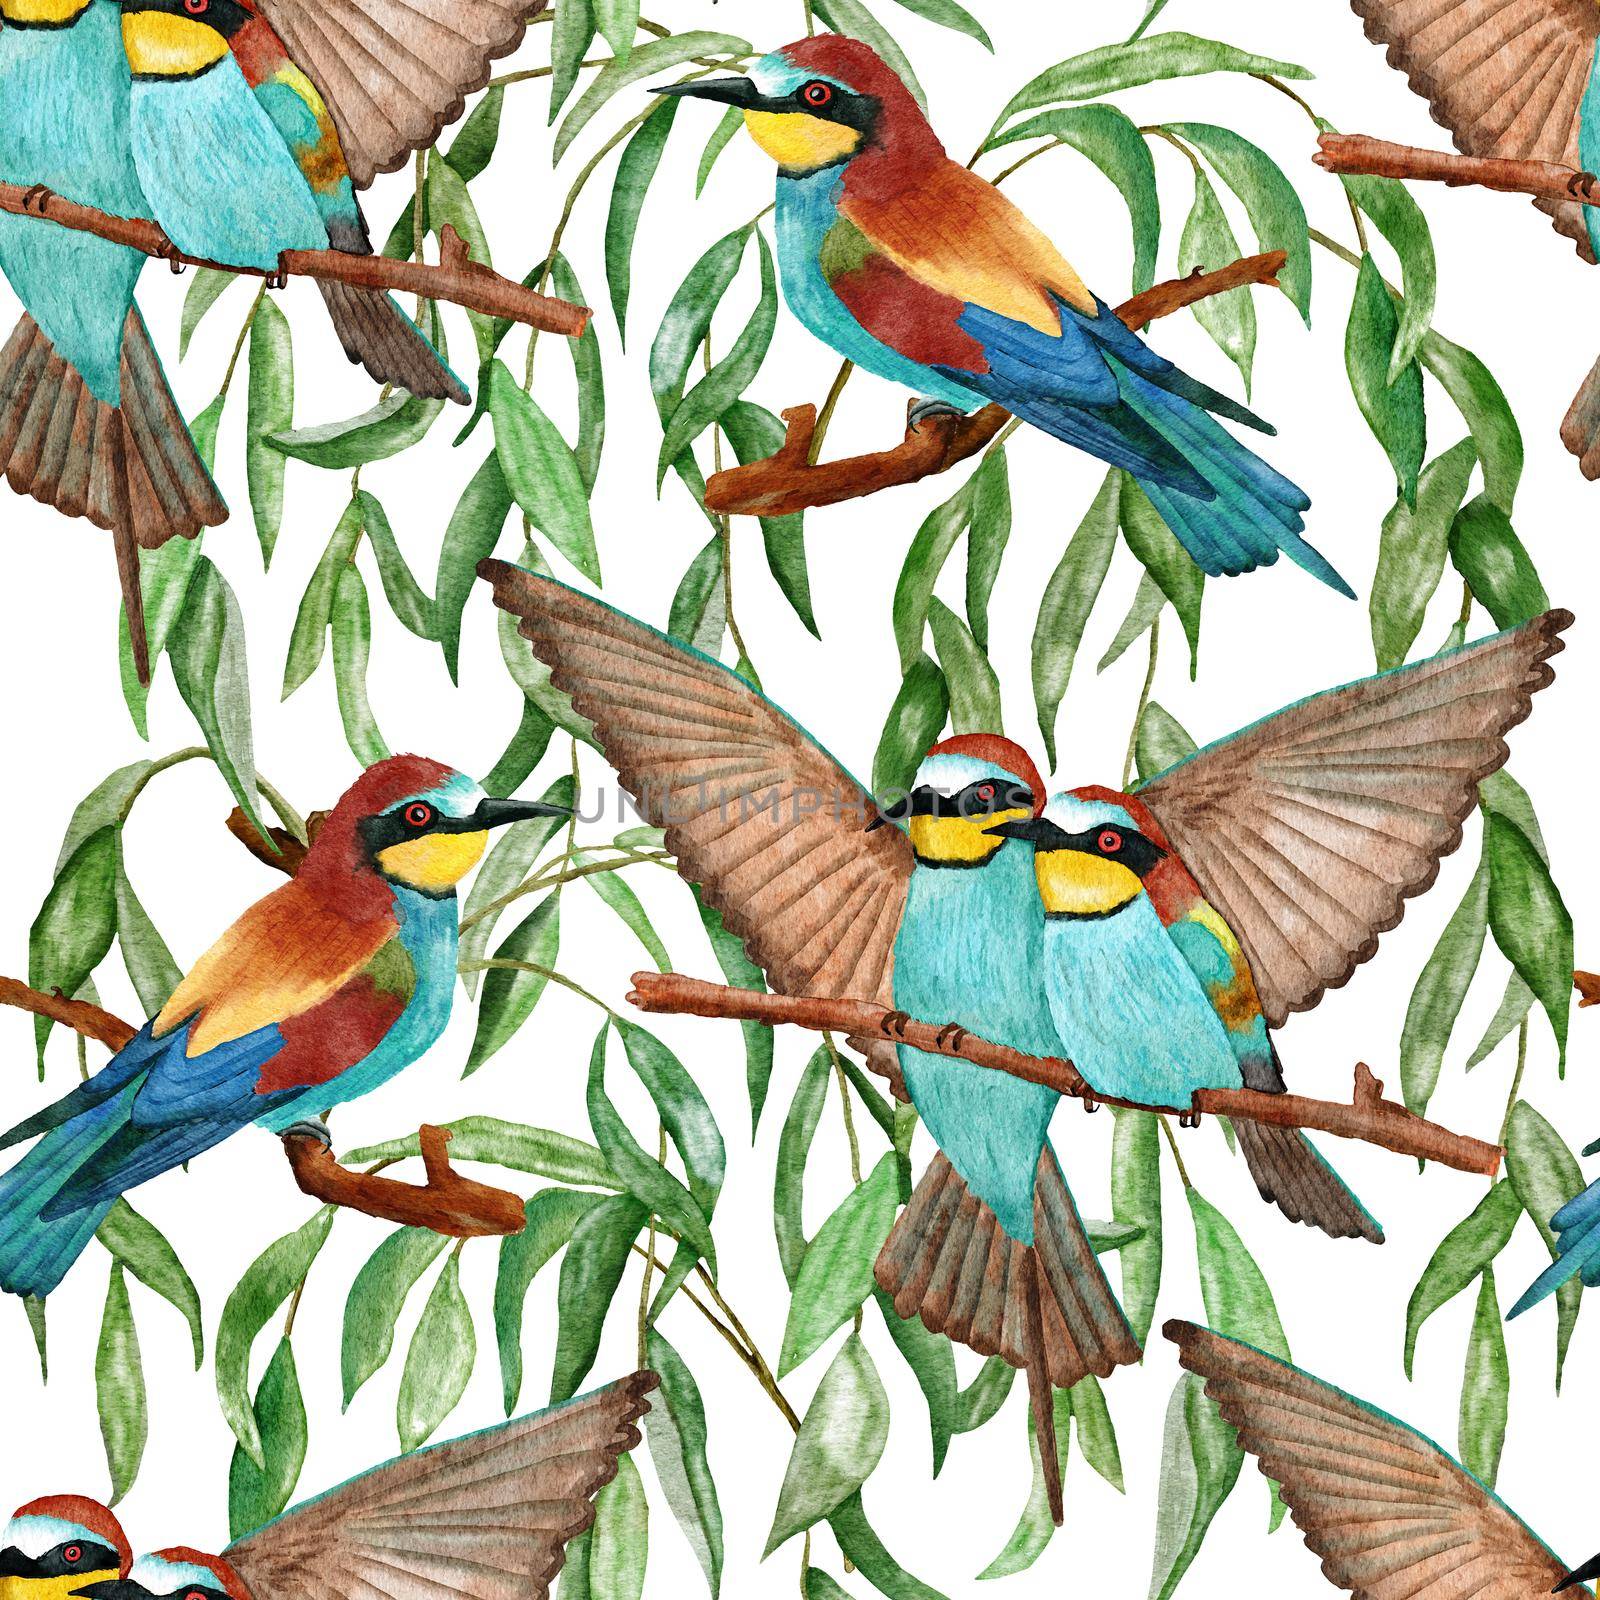 Watercolor seamless hand drawn pattern with kingfisher bee-eater birds in forest woodland. Willife natural vintage background with floral leaves greenery, bird flying design. by Lagmar